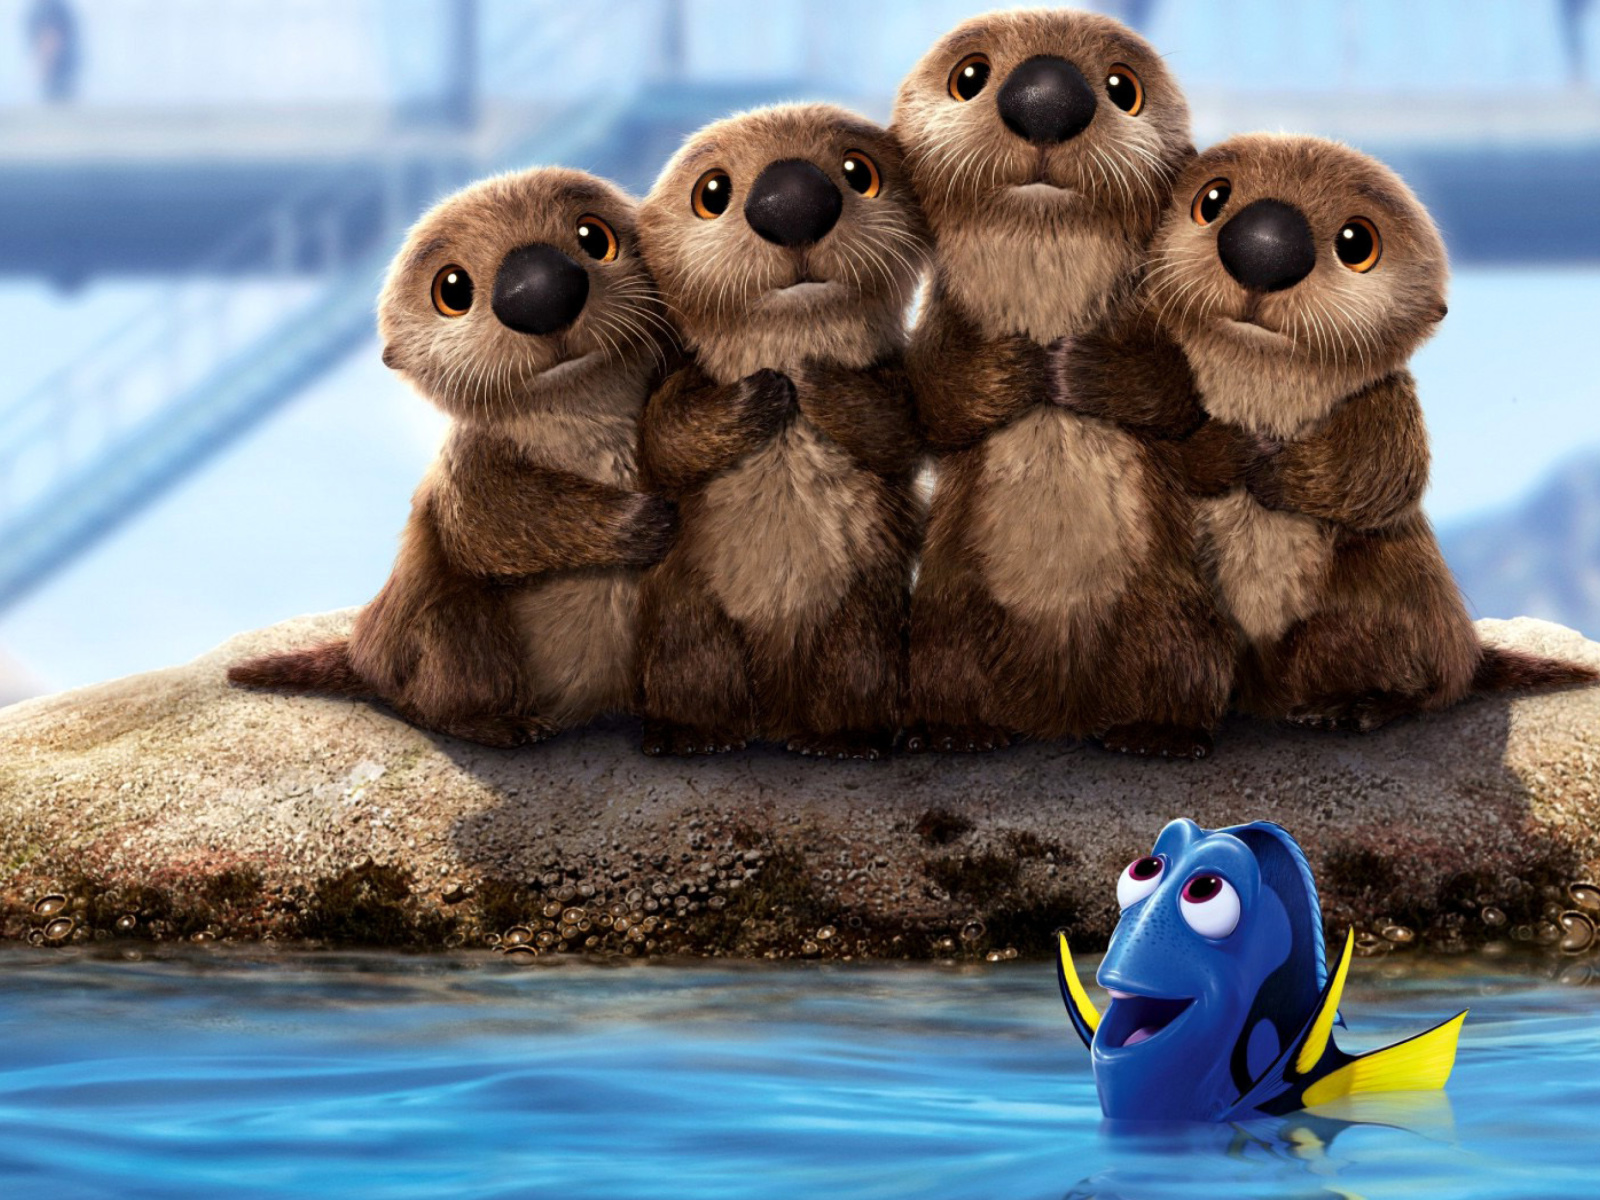 Das Finding Dory 3D Film with Beavers Wallpaper 1600x1200